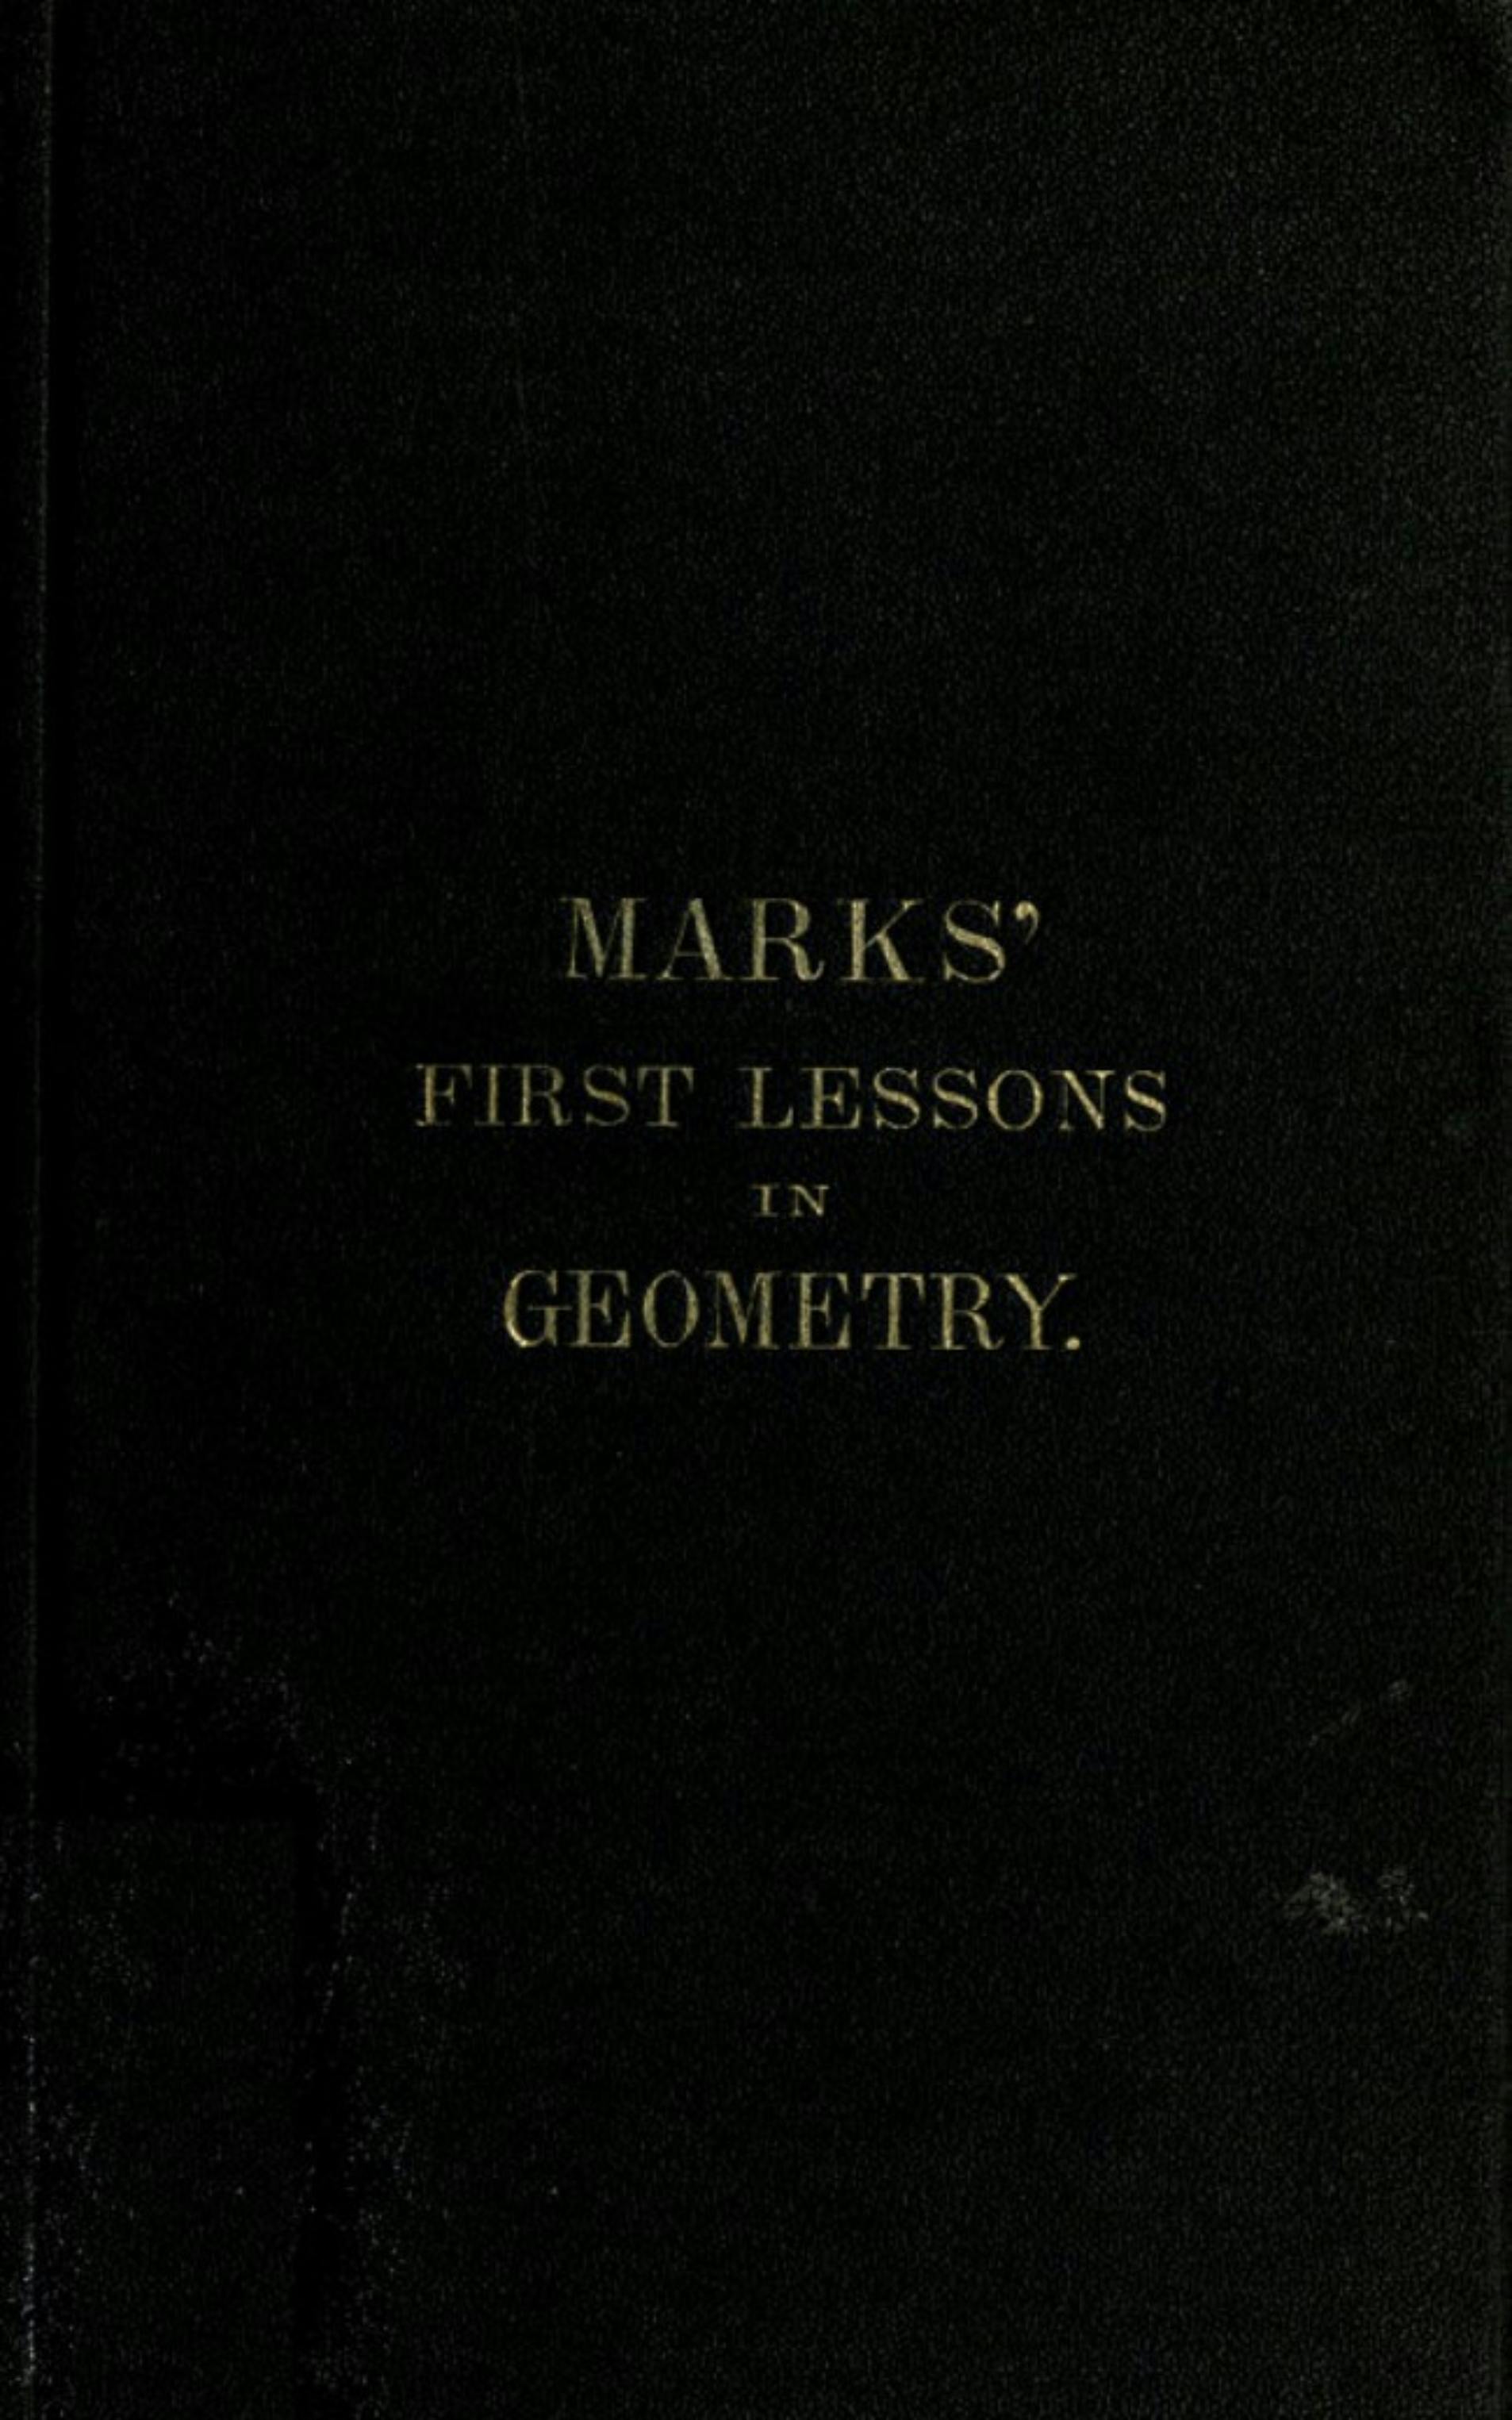 Marks' first lessons in geometry - Bernhard Marks